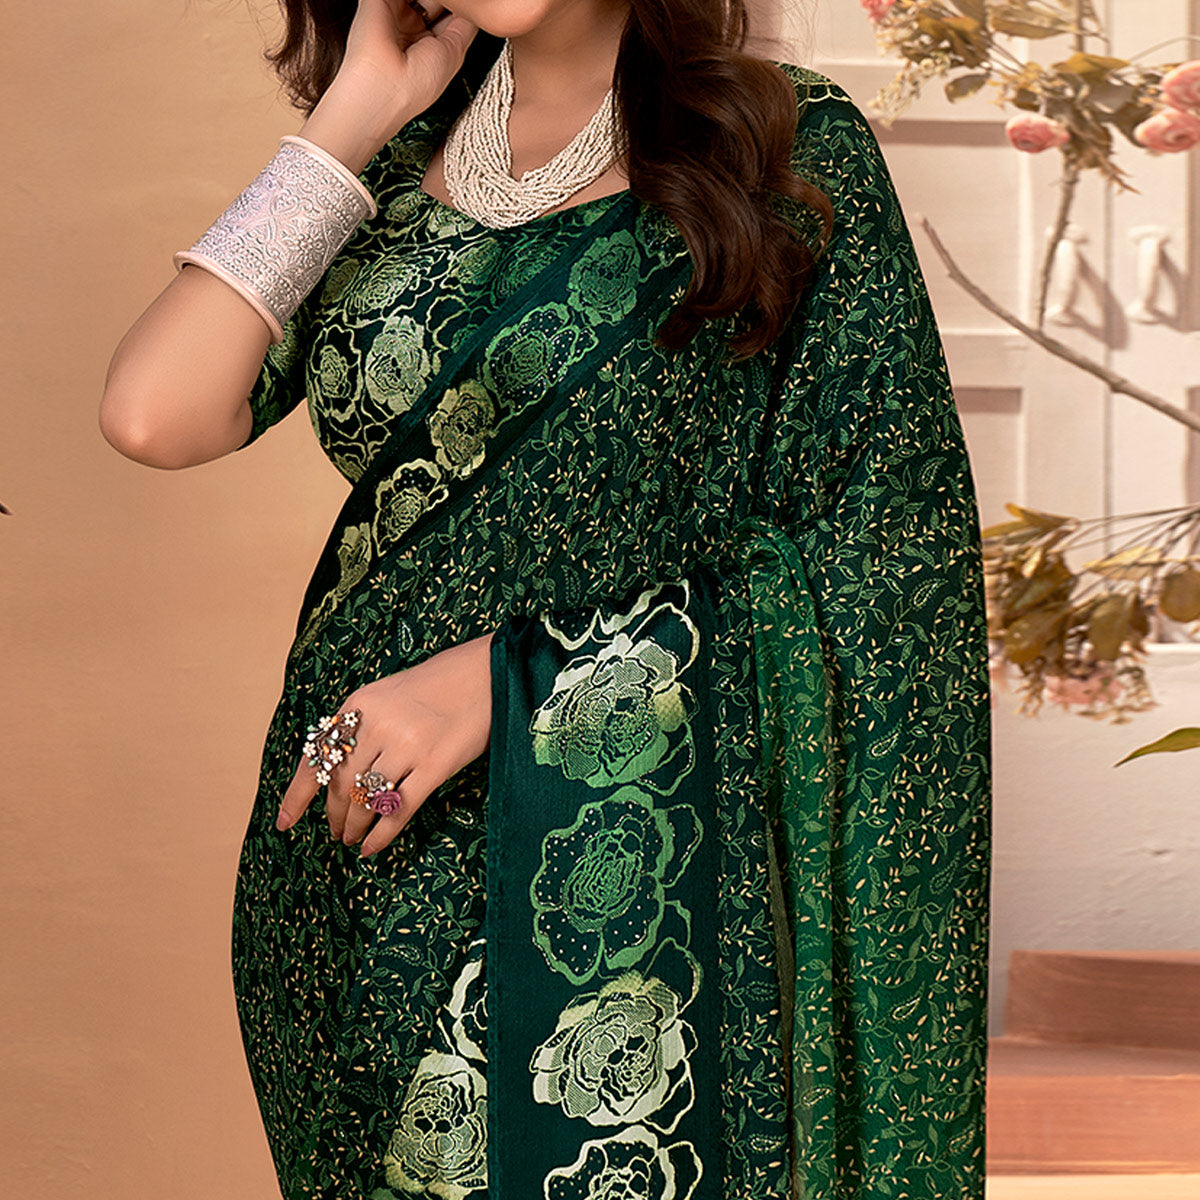 Green Floral Printed Georgette Saree with Satin Border